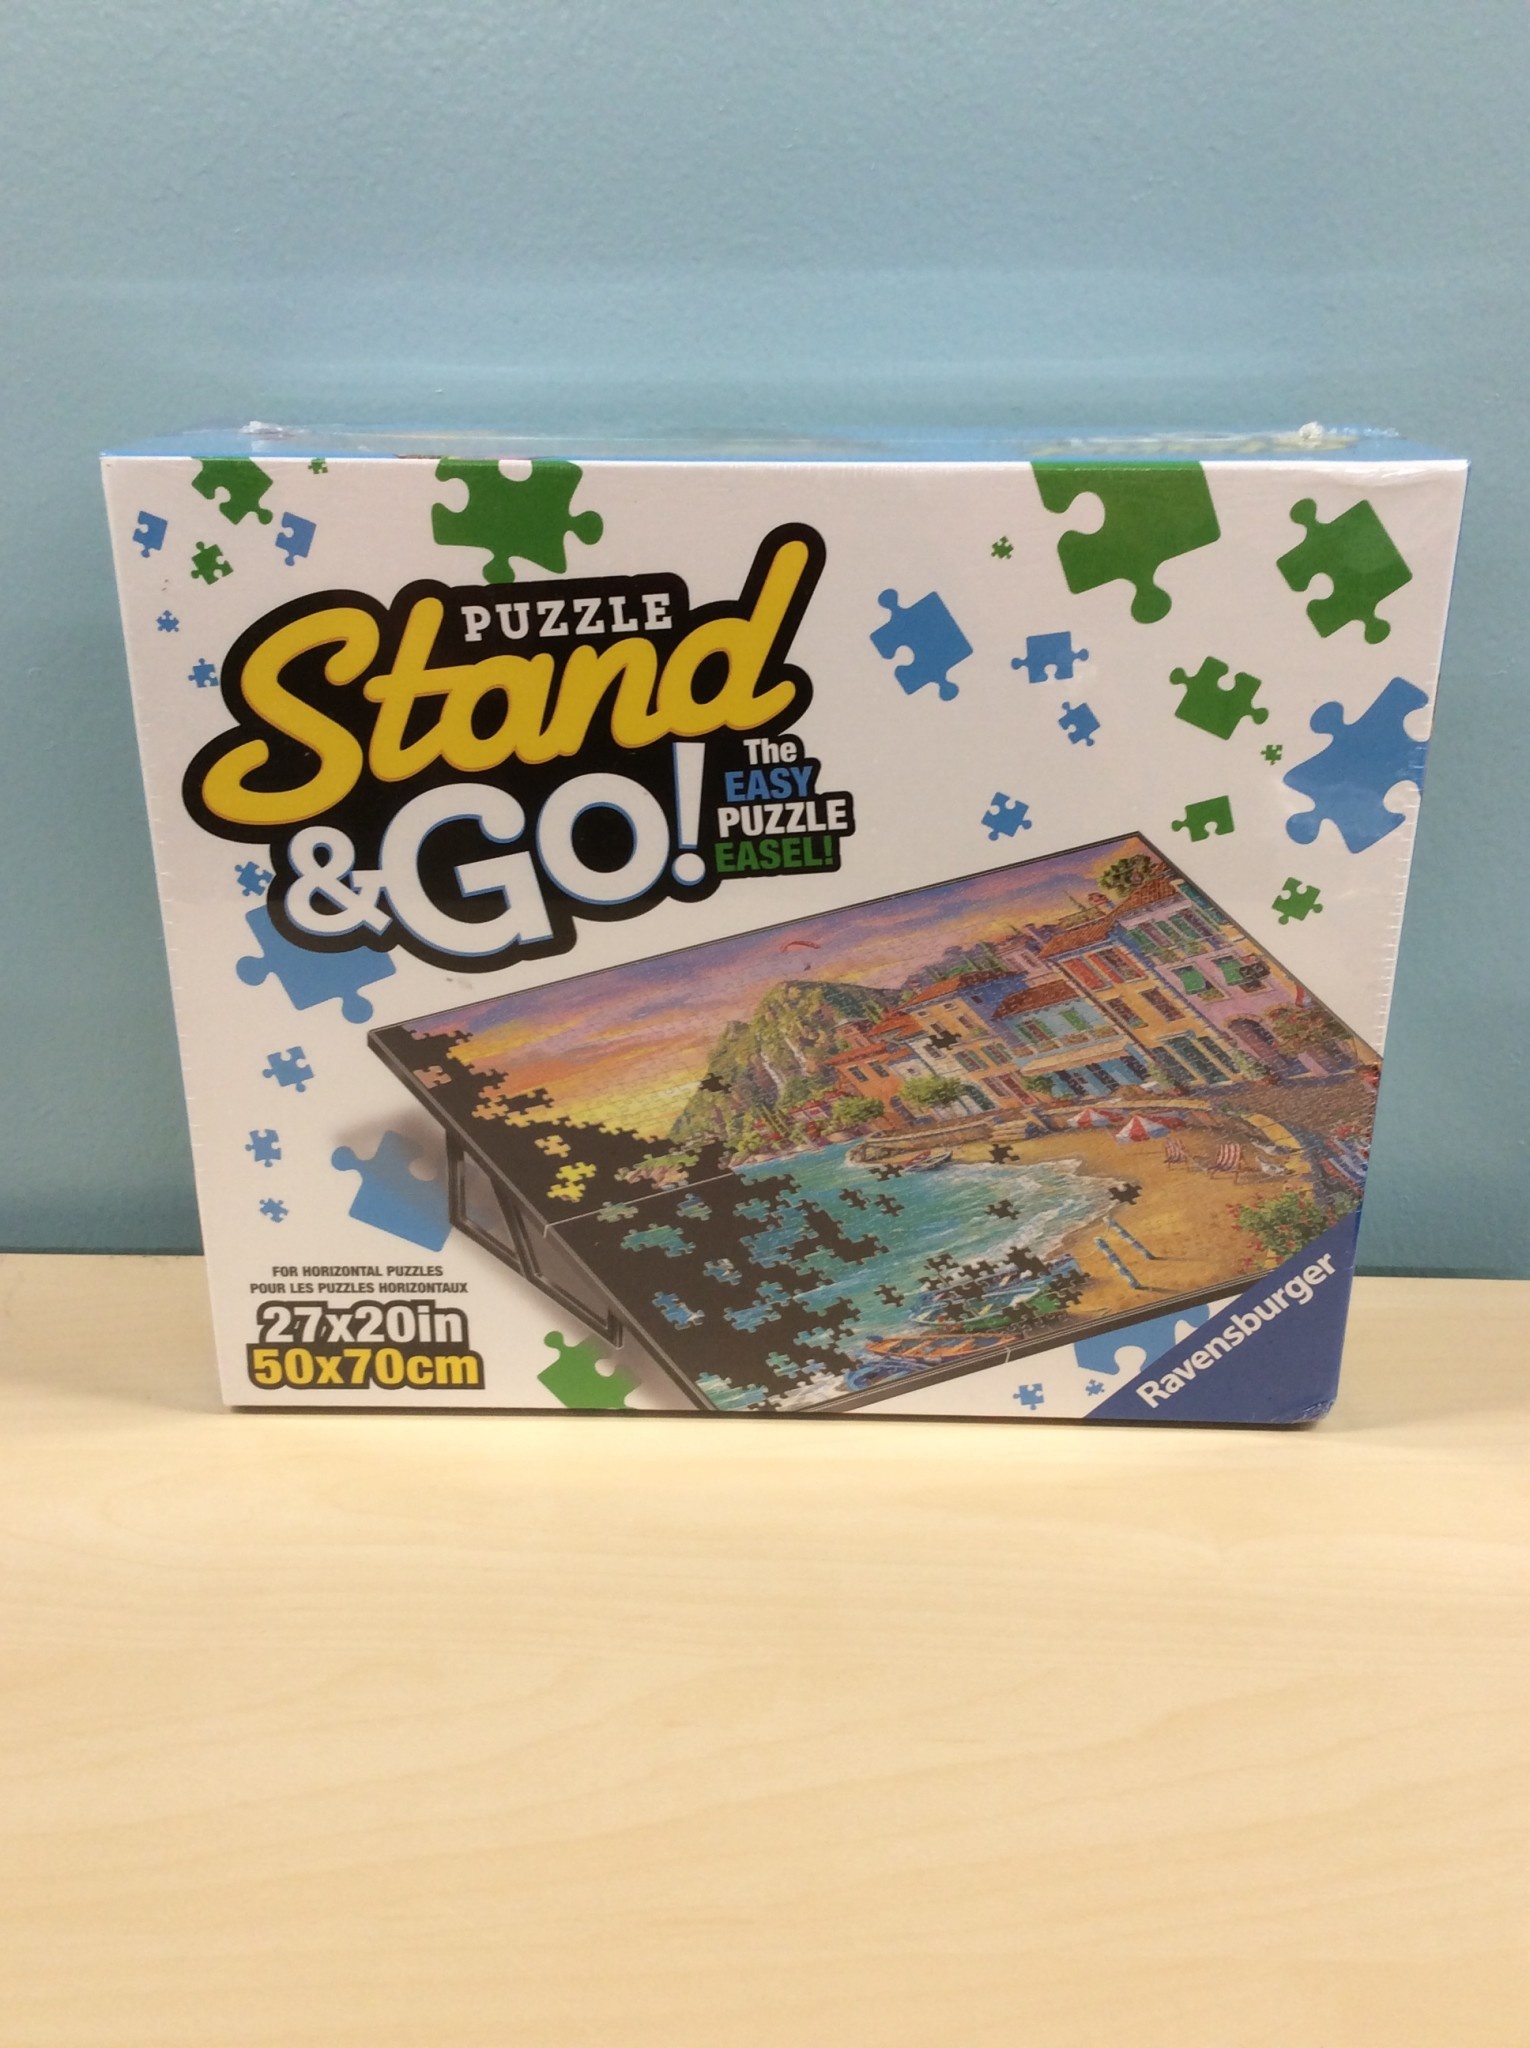 Puzzle Stand & Go! Accessory - Lets Play: Games & Toys